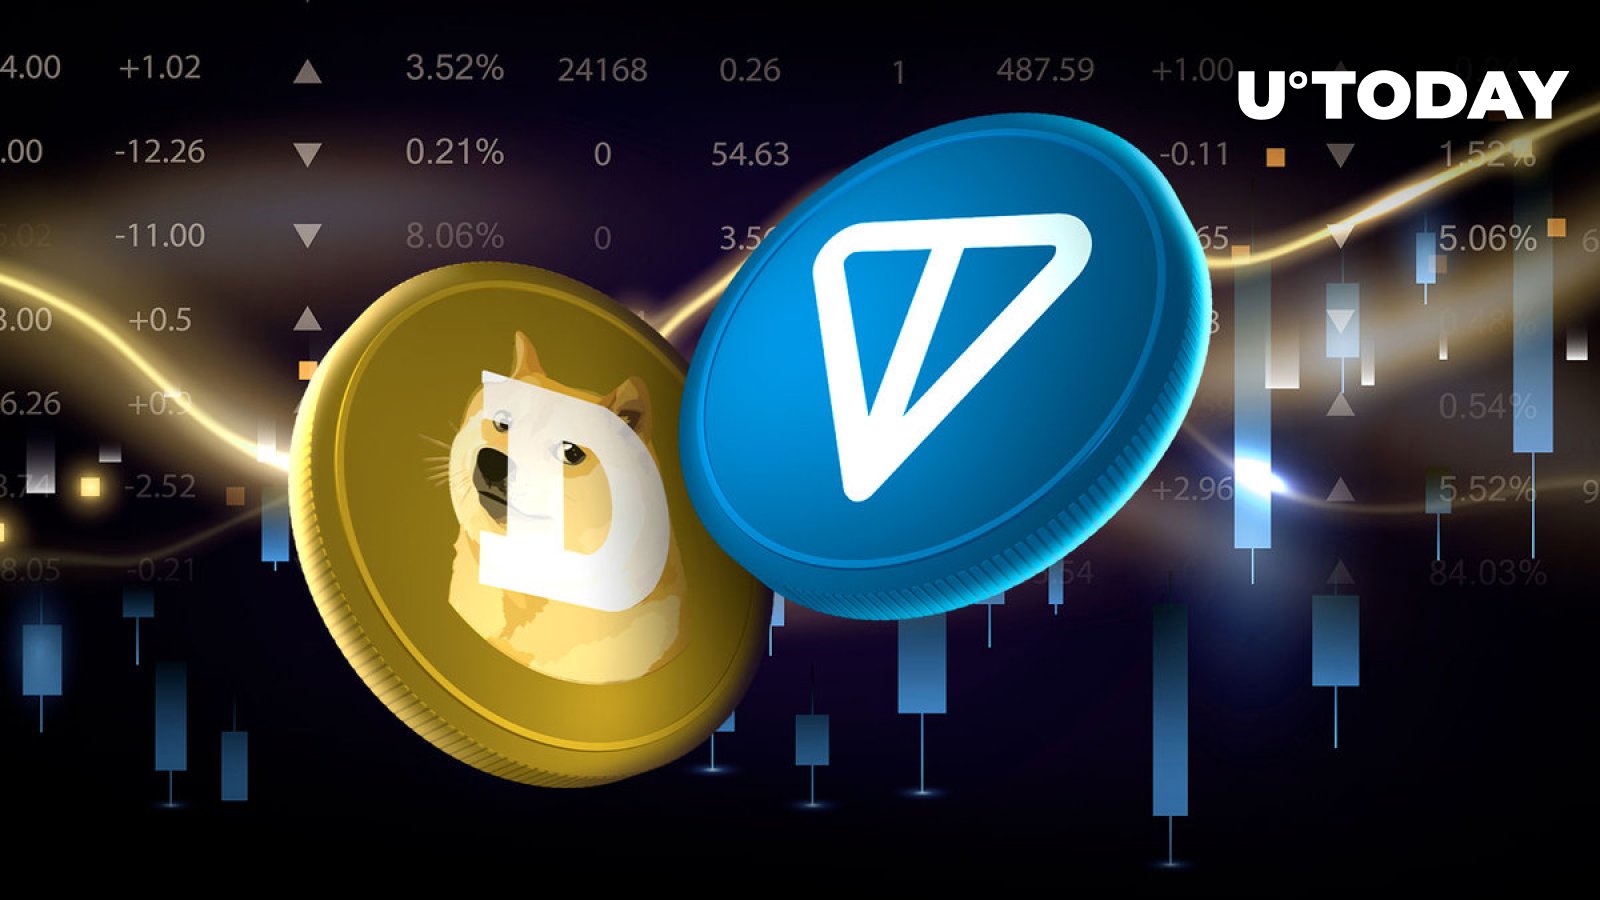 Toncoin (TON) Shoots 16%, Outshines Dogecoin (DOGE) In Epic Move